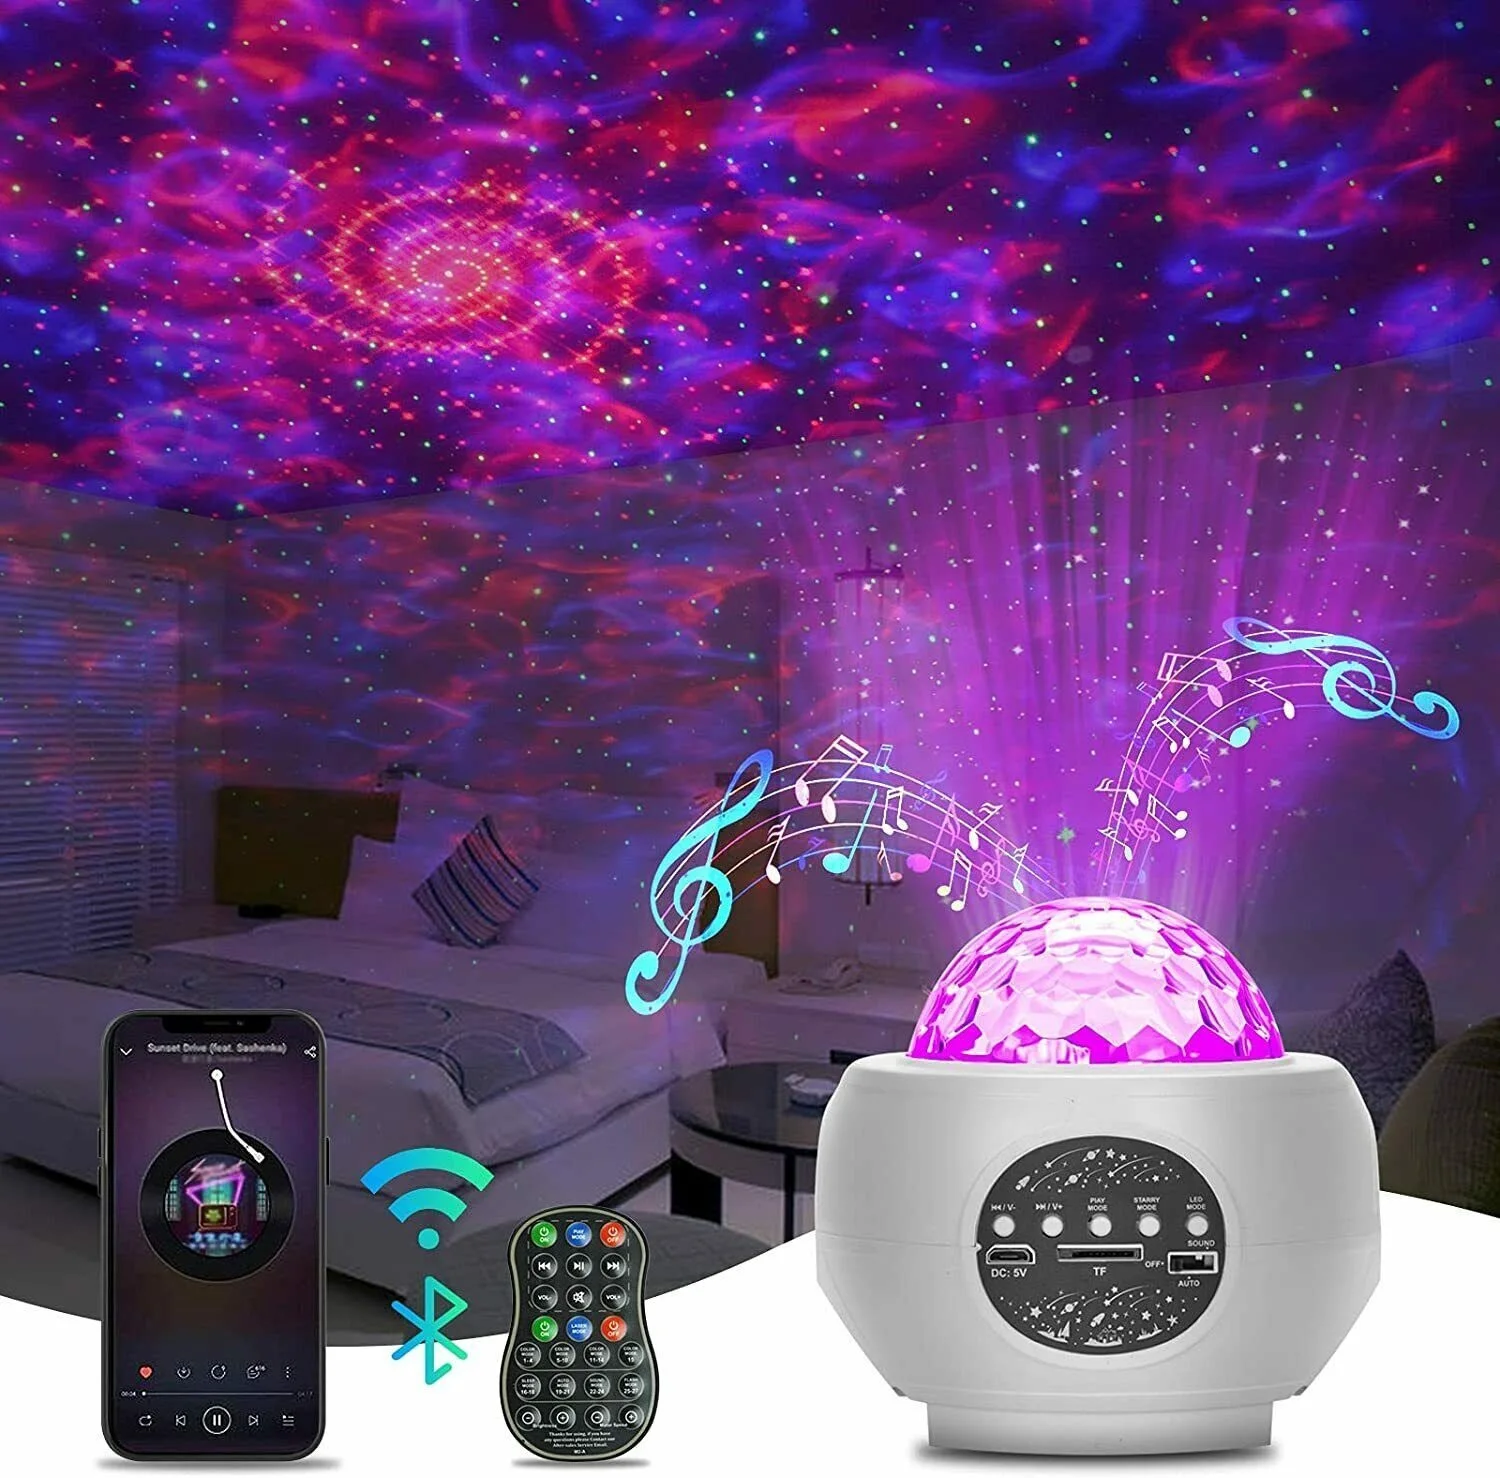 LED Galaxy Starry Night Light Projector Ocean Star Sky Party Speaker Lamp Remote 